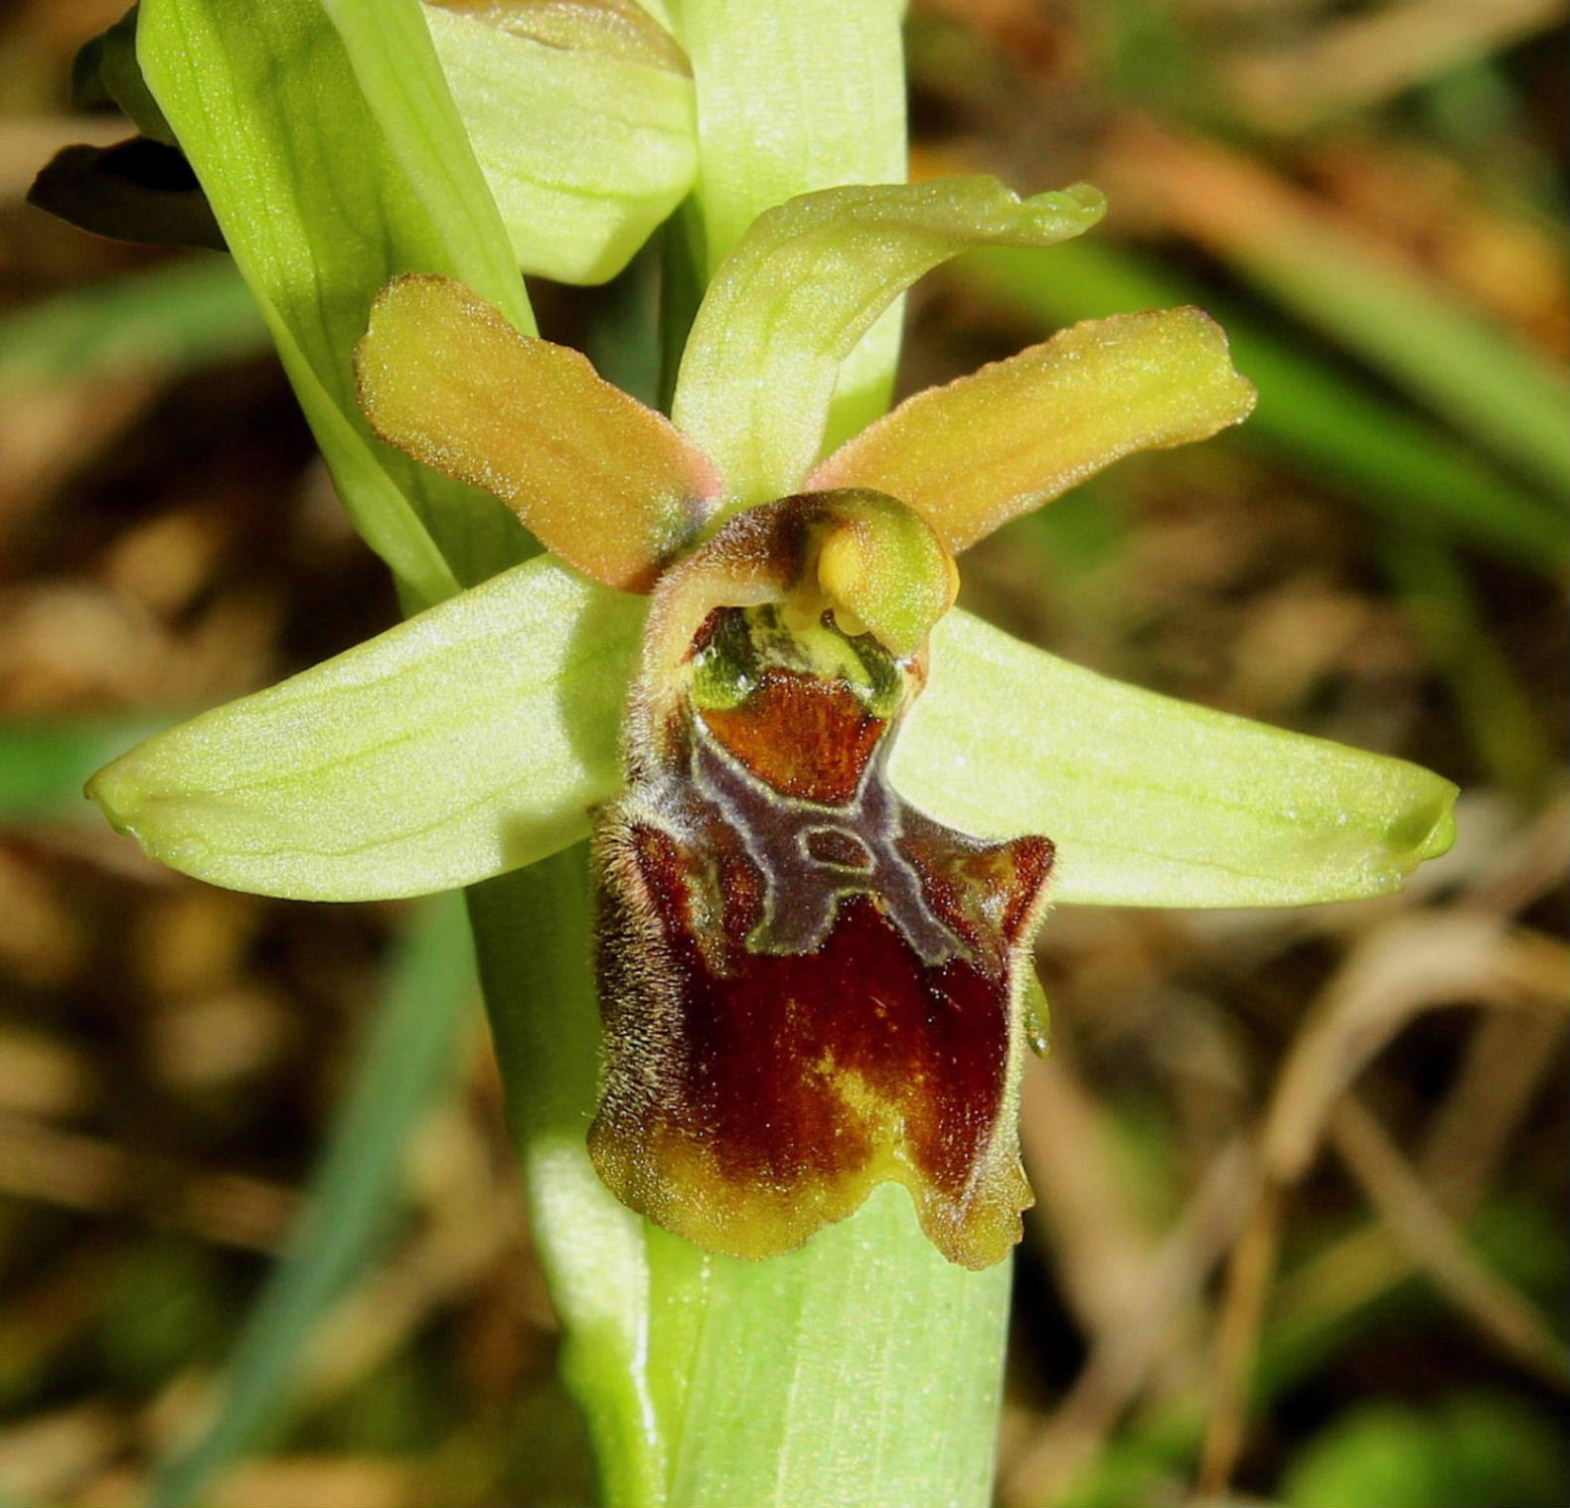 Ophrys massiliensis Viglione & Vla